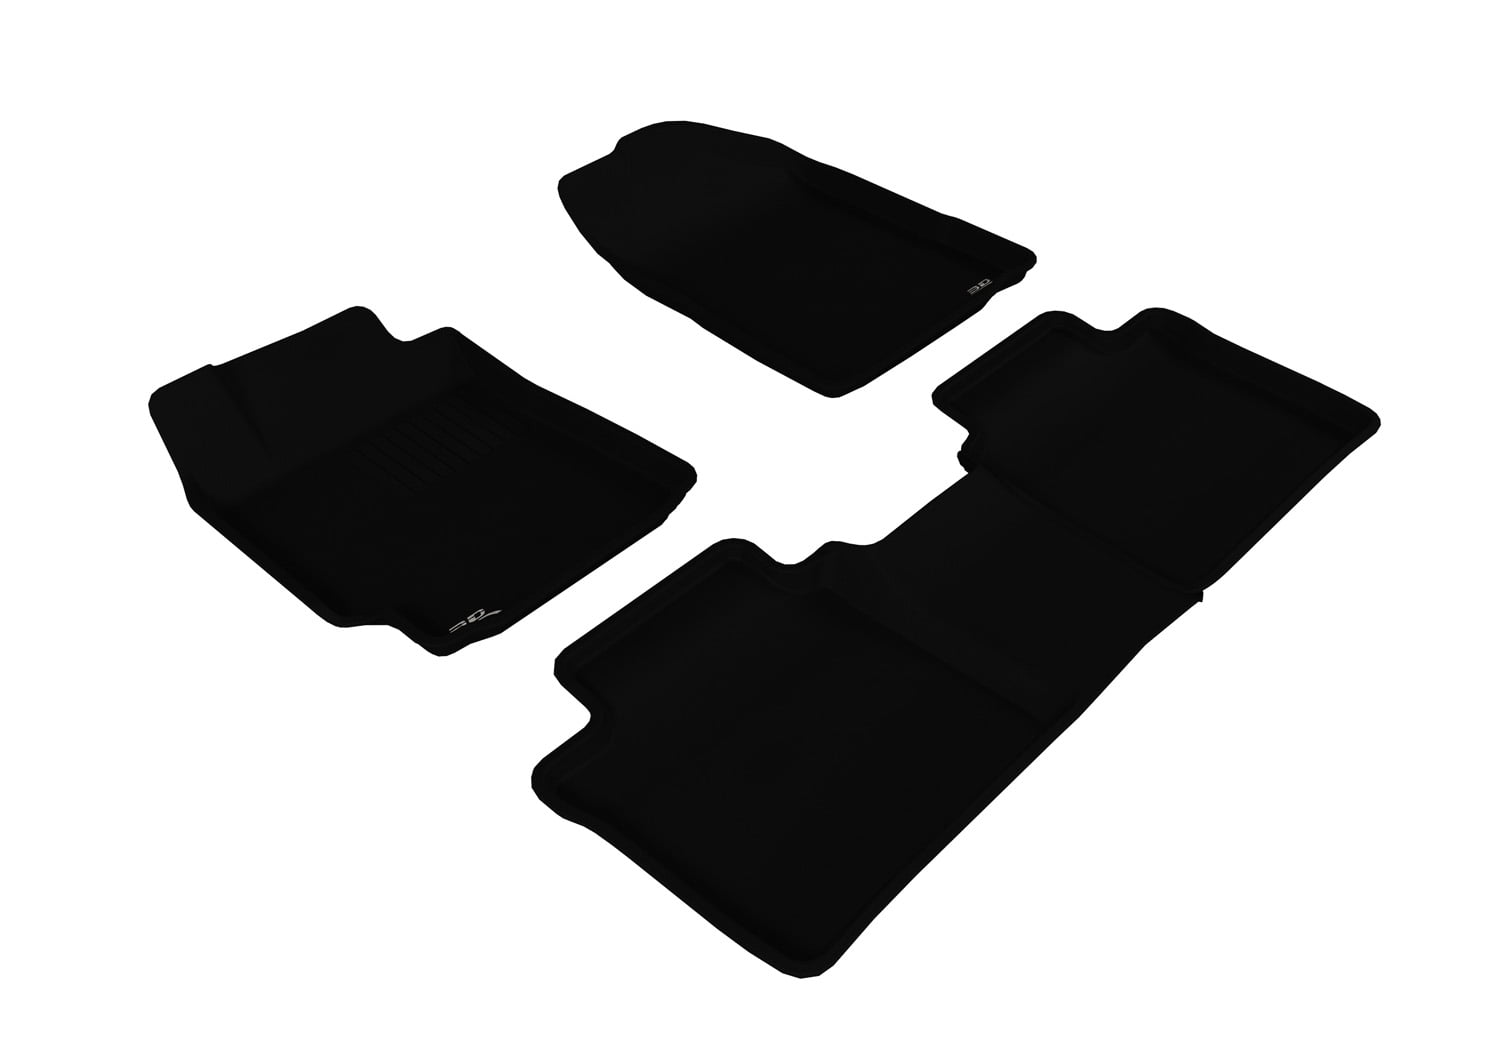 Kagu Rubber Black 3D MAXpider Second Row Custom Fit All-Weather Floor Mat for Select Toyota Camry/Lexus ES350 Models